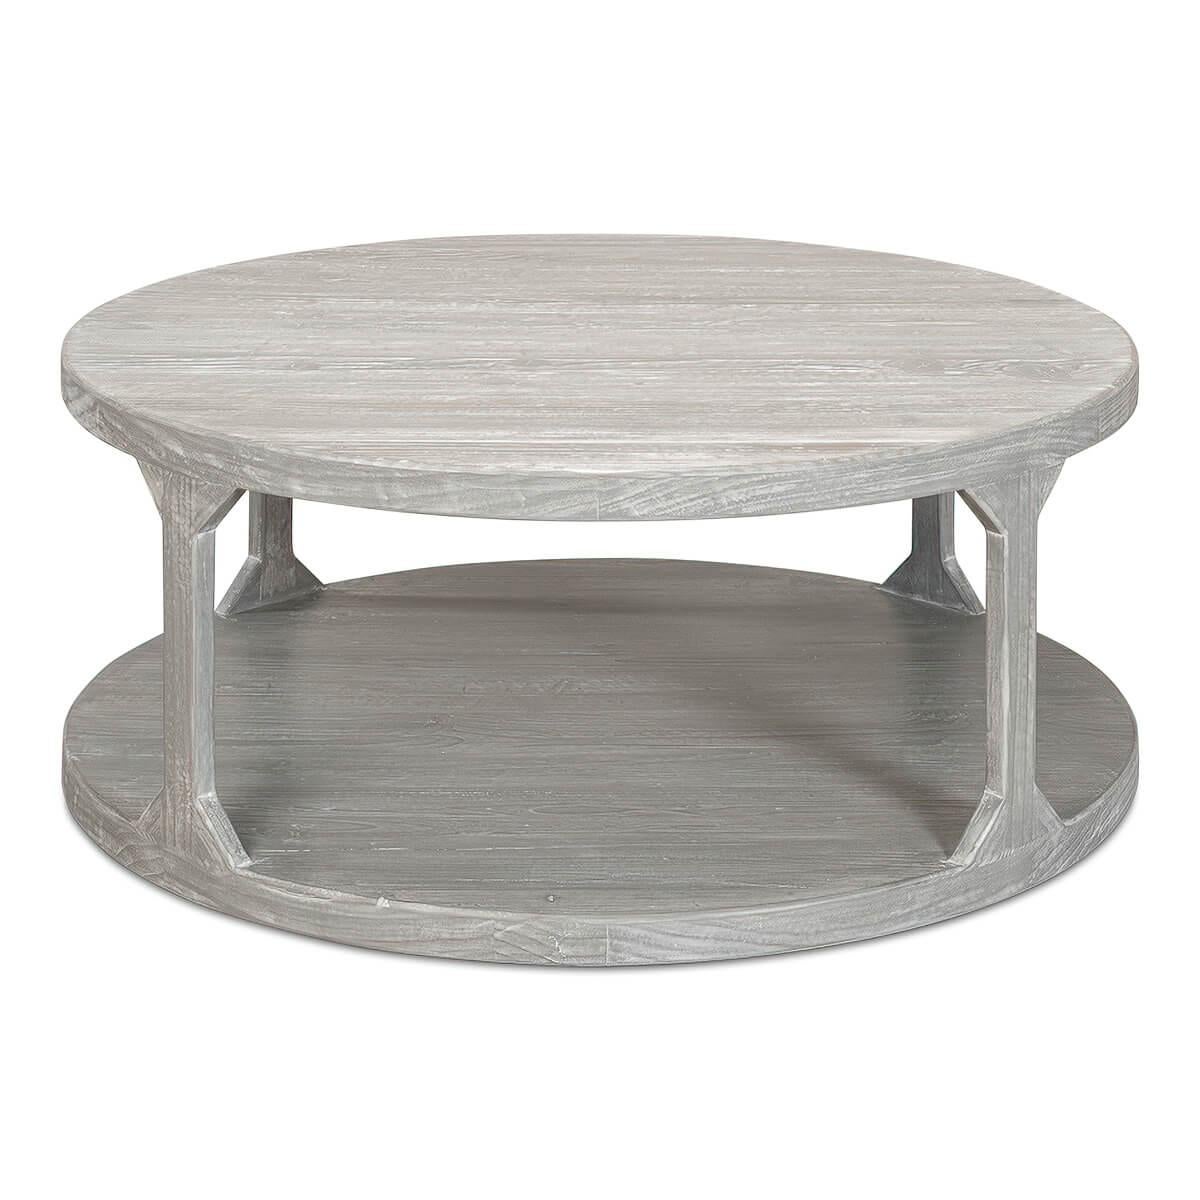 Organic modern round coffee table, the two-tier table finished in a greyed over pine.

Dimensions: 45